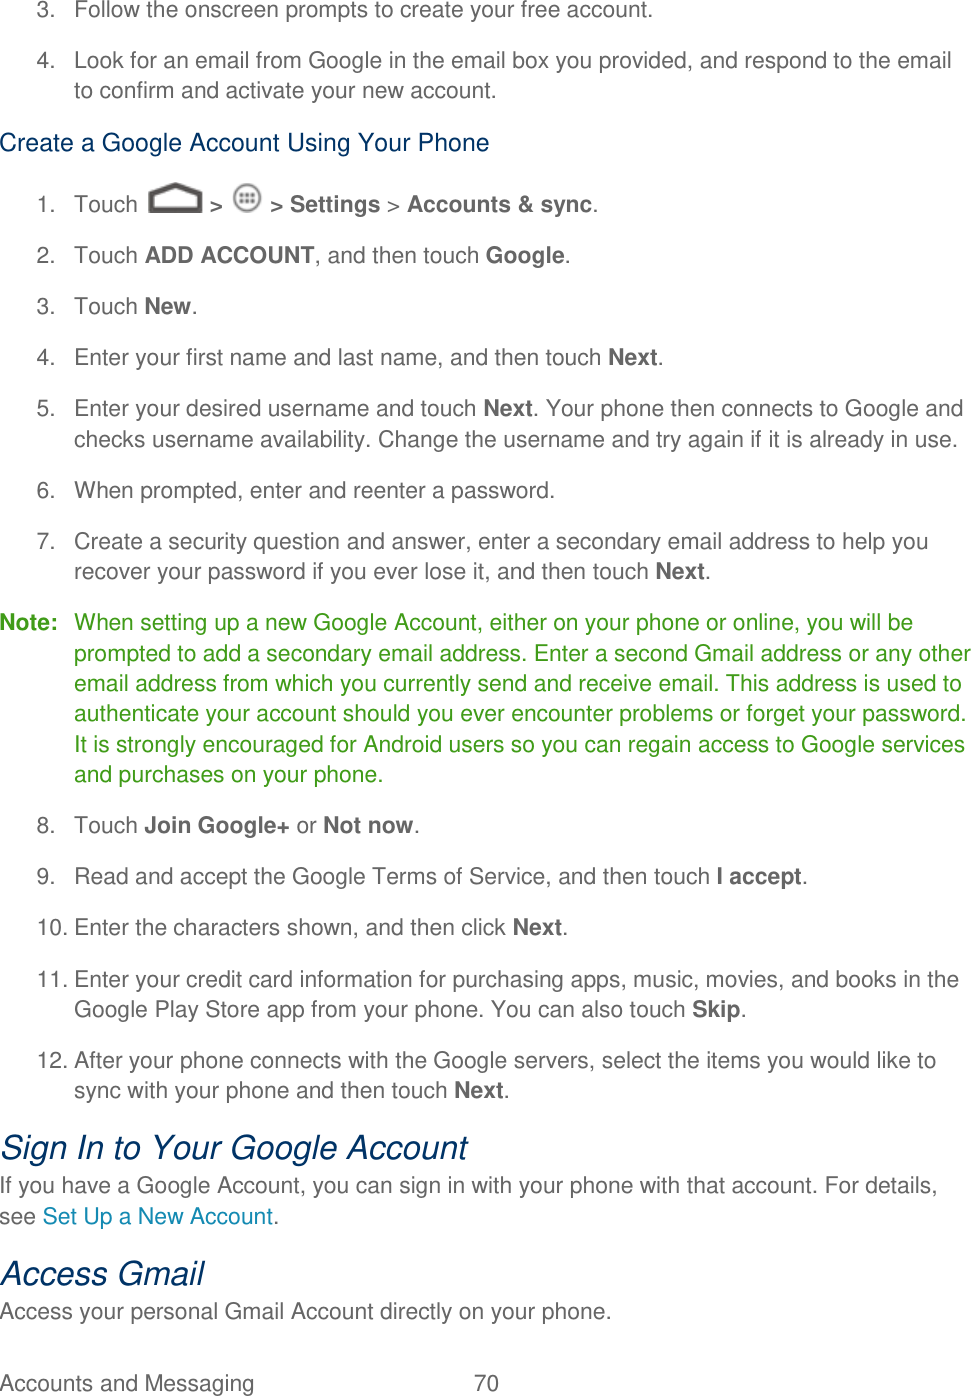 Accounts and Messaging  70   3.  Follow the onscreen prompts to create your free account. 4.  Look for an email from Google in the email box you provided, and respond to the email to confirm and activate your new account. Create a Google Account Using Your Phone 1.  Touch   &gt;   &gt; Settings &gt; Accounts &amp; sync. 2.  Touch ADD ACCOUNT, and then touch Google.  3.  Touch New. 4.  Enter your first name and last name, and then touch Next.  5.  Enter your desired username and touch Next. Your phone then connects to Google and checks username availability. Change the username and try again if it is already in use. 6.  When prompted, enter and reenter a password. 7.  Create a security question and answer, enter a secondary email address to help you recover your password if you ever lose it, and then touch Next.  Note:  When setting up a new Google Account, either on your phone or online, you will be prompted to add a secondary email address. Enter a second Gmail address or any other email address from which you currently send and receive email. This address is used to authenticate your account should you ever encounter problems or forget your password. It is strongly encouraged for Android users so you can regain access to Google services and purchases on your phone. 8.  Touch Join Google+ or Not now. 9.  Read and accept the Google Terms of Service, and then touch I accept.  10. Enter the characters shown, and then click Next. 11. Enter your credit card information for purchasing apps, music, movies, and books in the Google Play Store app from your phone. You can also touch Skip. 12. After your phone connects with the Google servers, select the items you would like to sync with your phone and then touch Next.  Sign In to Your Google Account If you have a Google Account, you can sign in with your phone with that account. For details, see Set Up a New Account. Access Gmail Access your personal Gmail Account directly on your phone. 